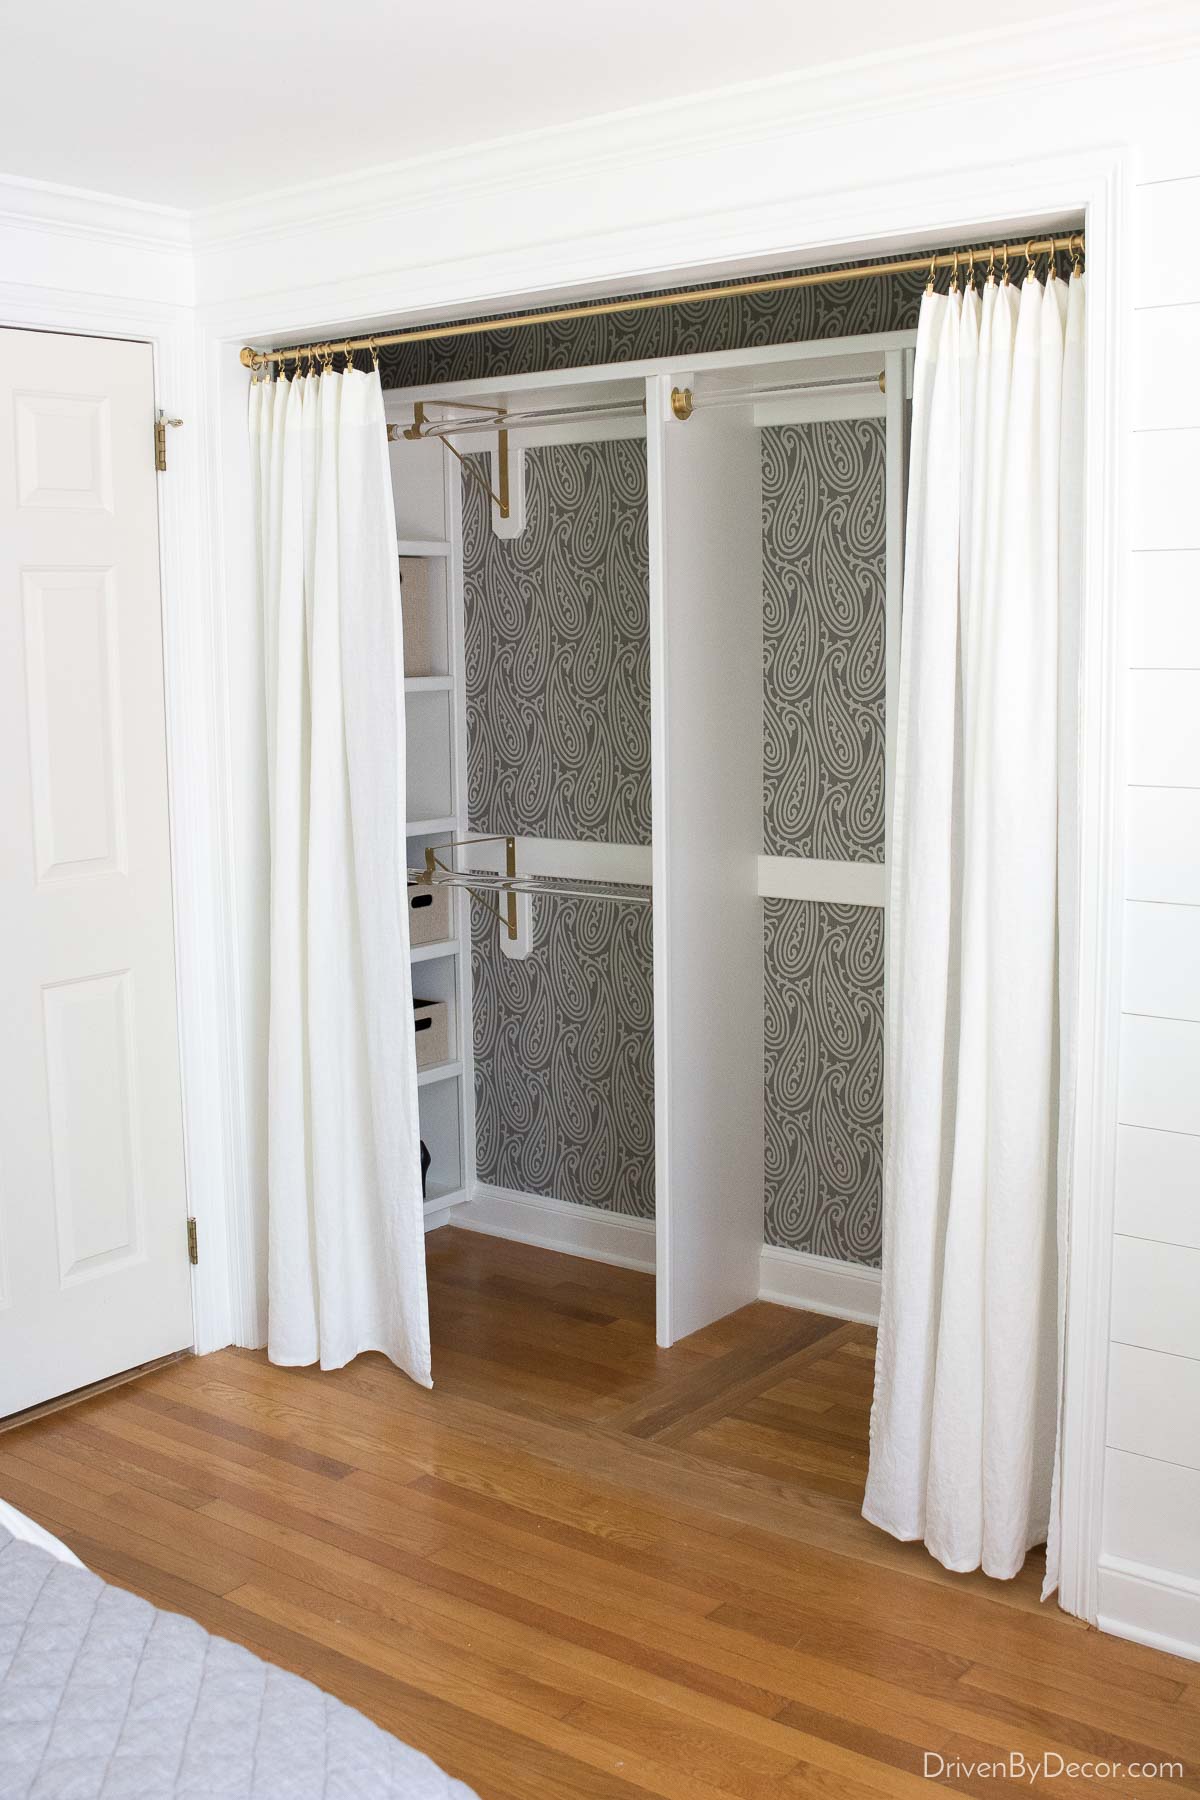 IKEA white curtains hung across closet in place of doors